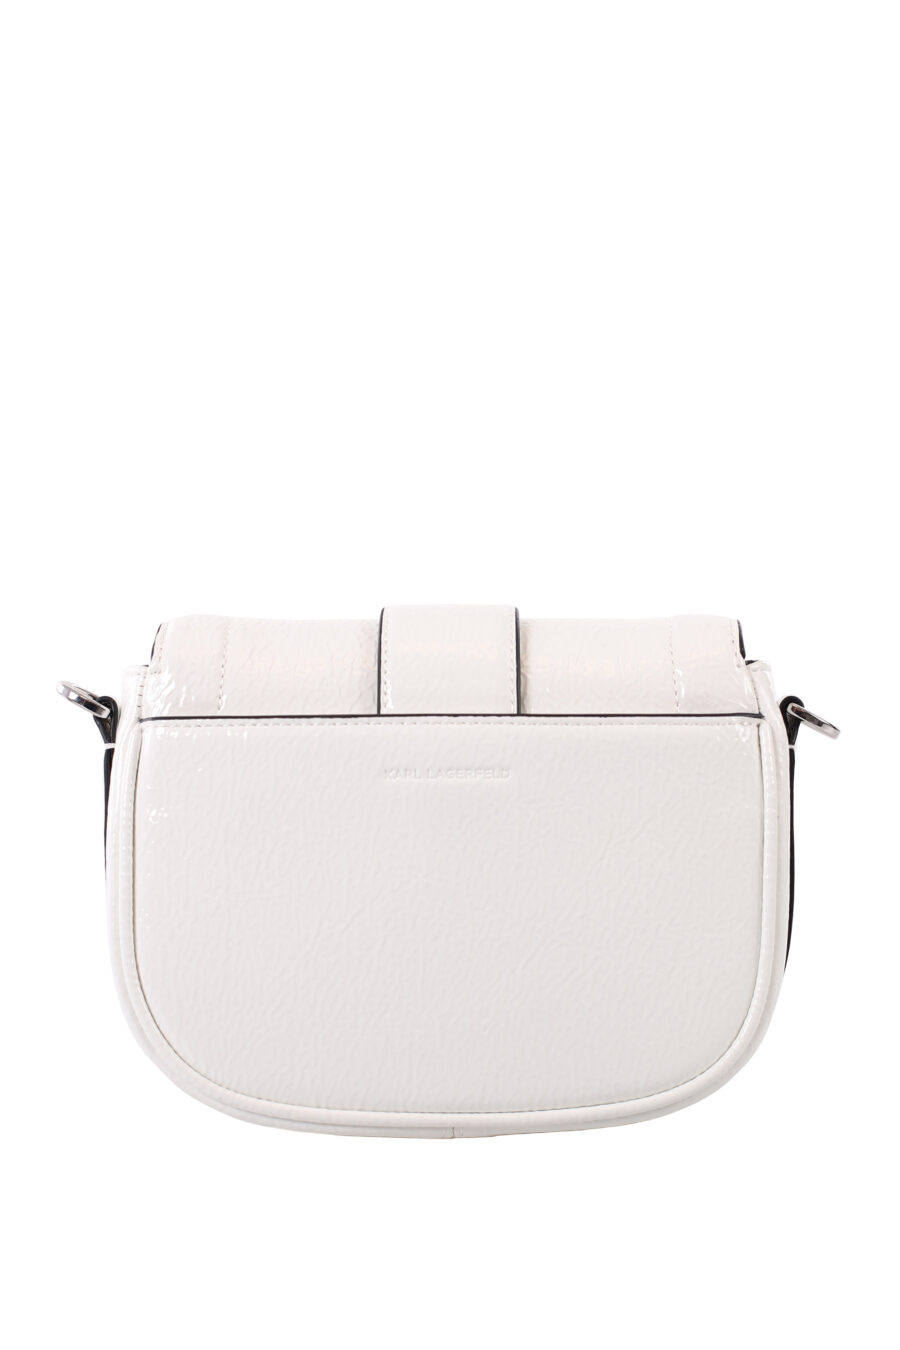 Small white flap shoulder bag with metal logo - IMG 1735